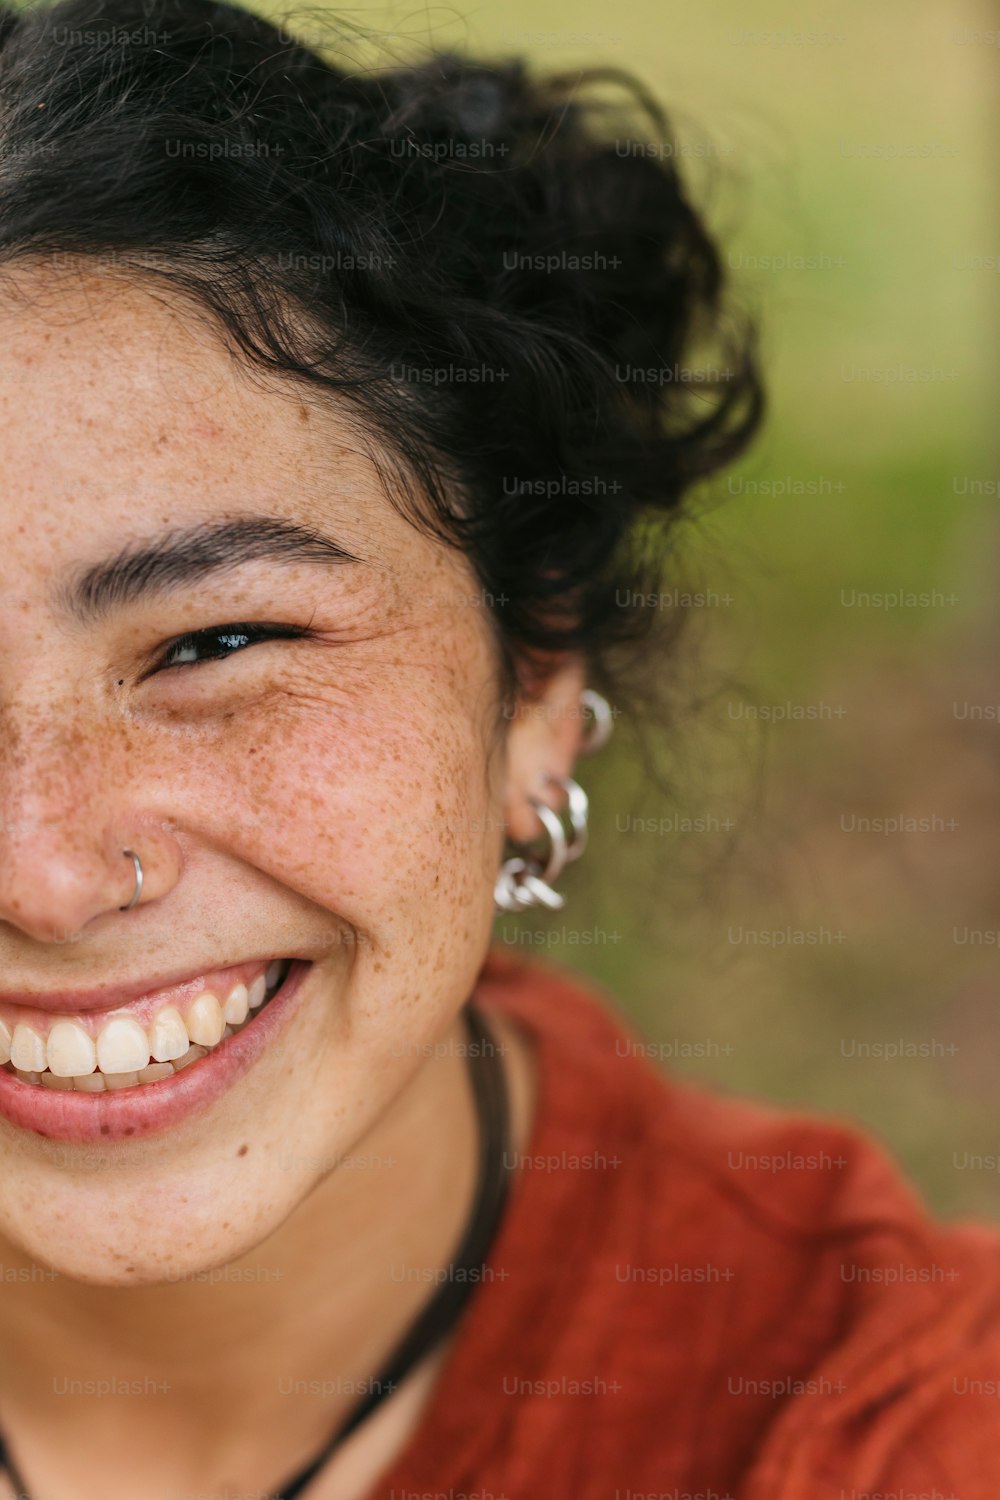 a close up of a person with freckles on